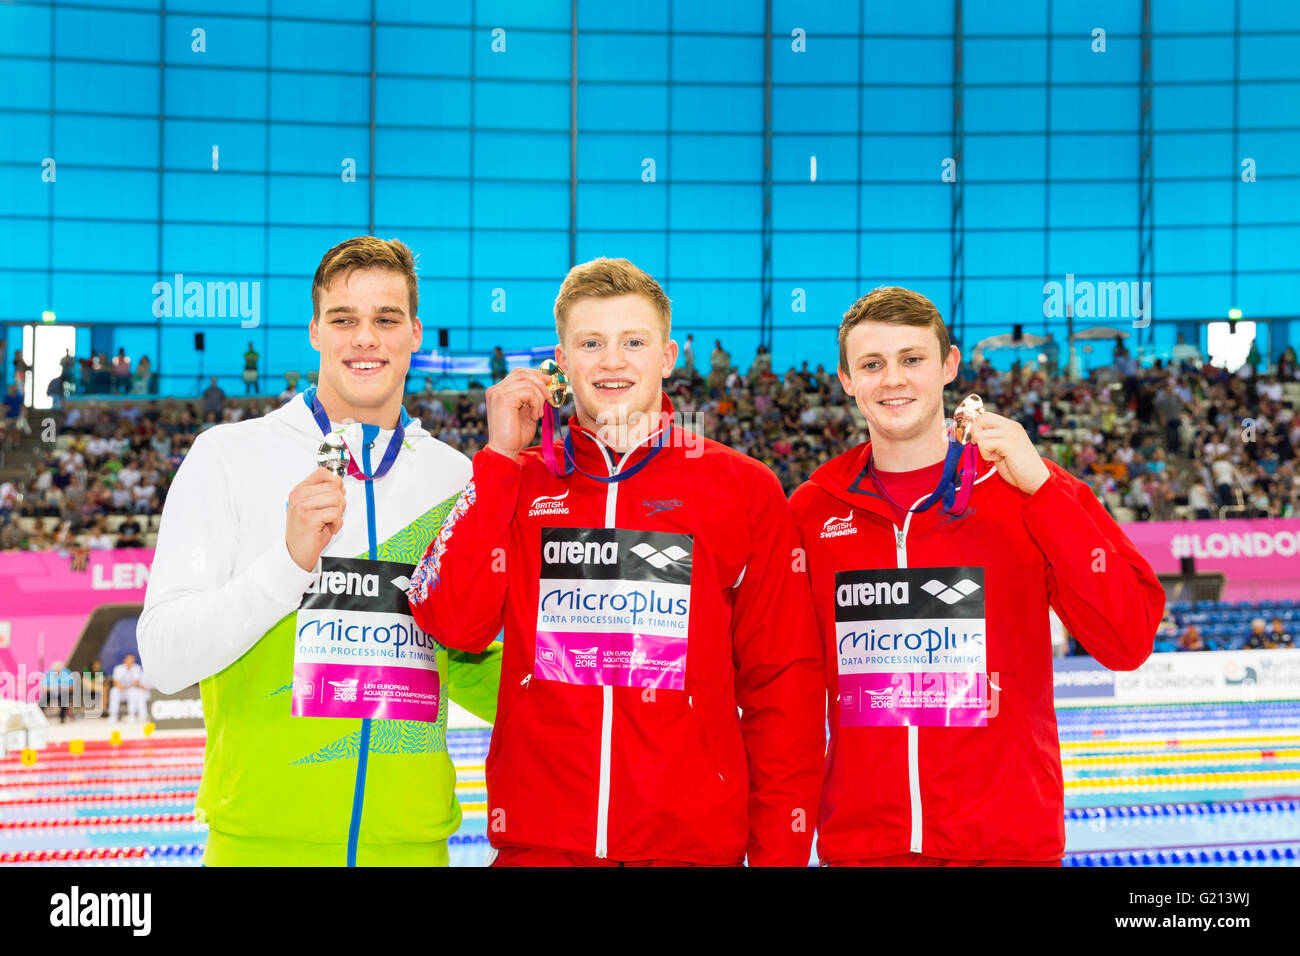 Aquatics Centre, London, UK, 21st May 2016. European Swimming Championships. Men's 50m breaststroke final. The winners show off their medals, Stevens (l), Peaty (m), Murdoch (r). British favourite Adam Peaty wins the gold medal in 26.66, with 2nd British swimmer Ross Murdoch taking Bronze in 27.31, whilst silver goes to Slovenian Peter John Stevens in 27.09. Credit:  Imageplotter News and Sports/Alamy Live News Stock Photo